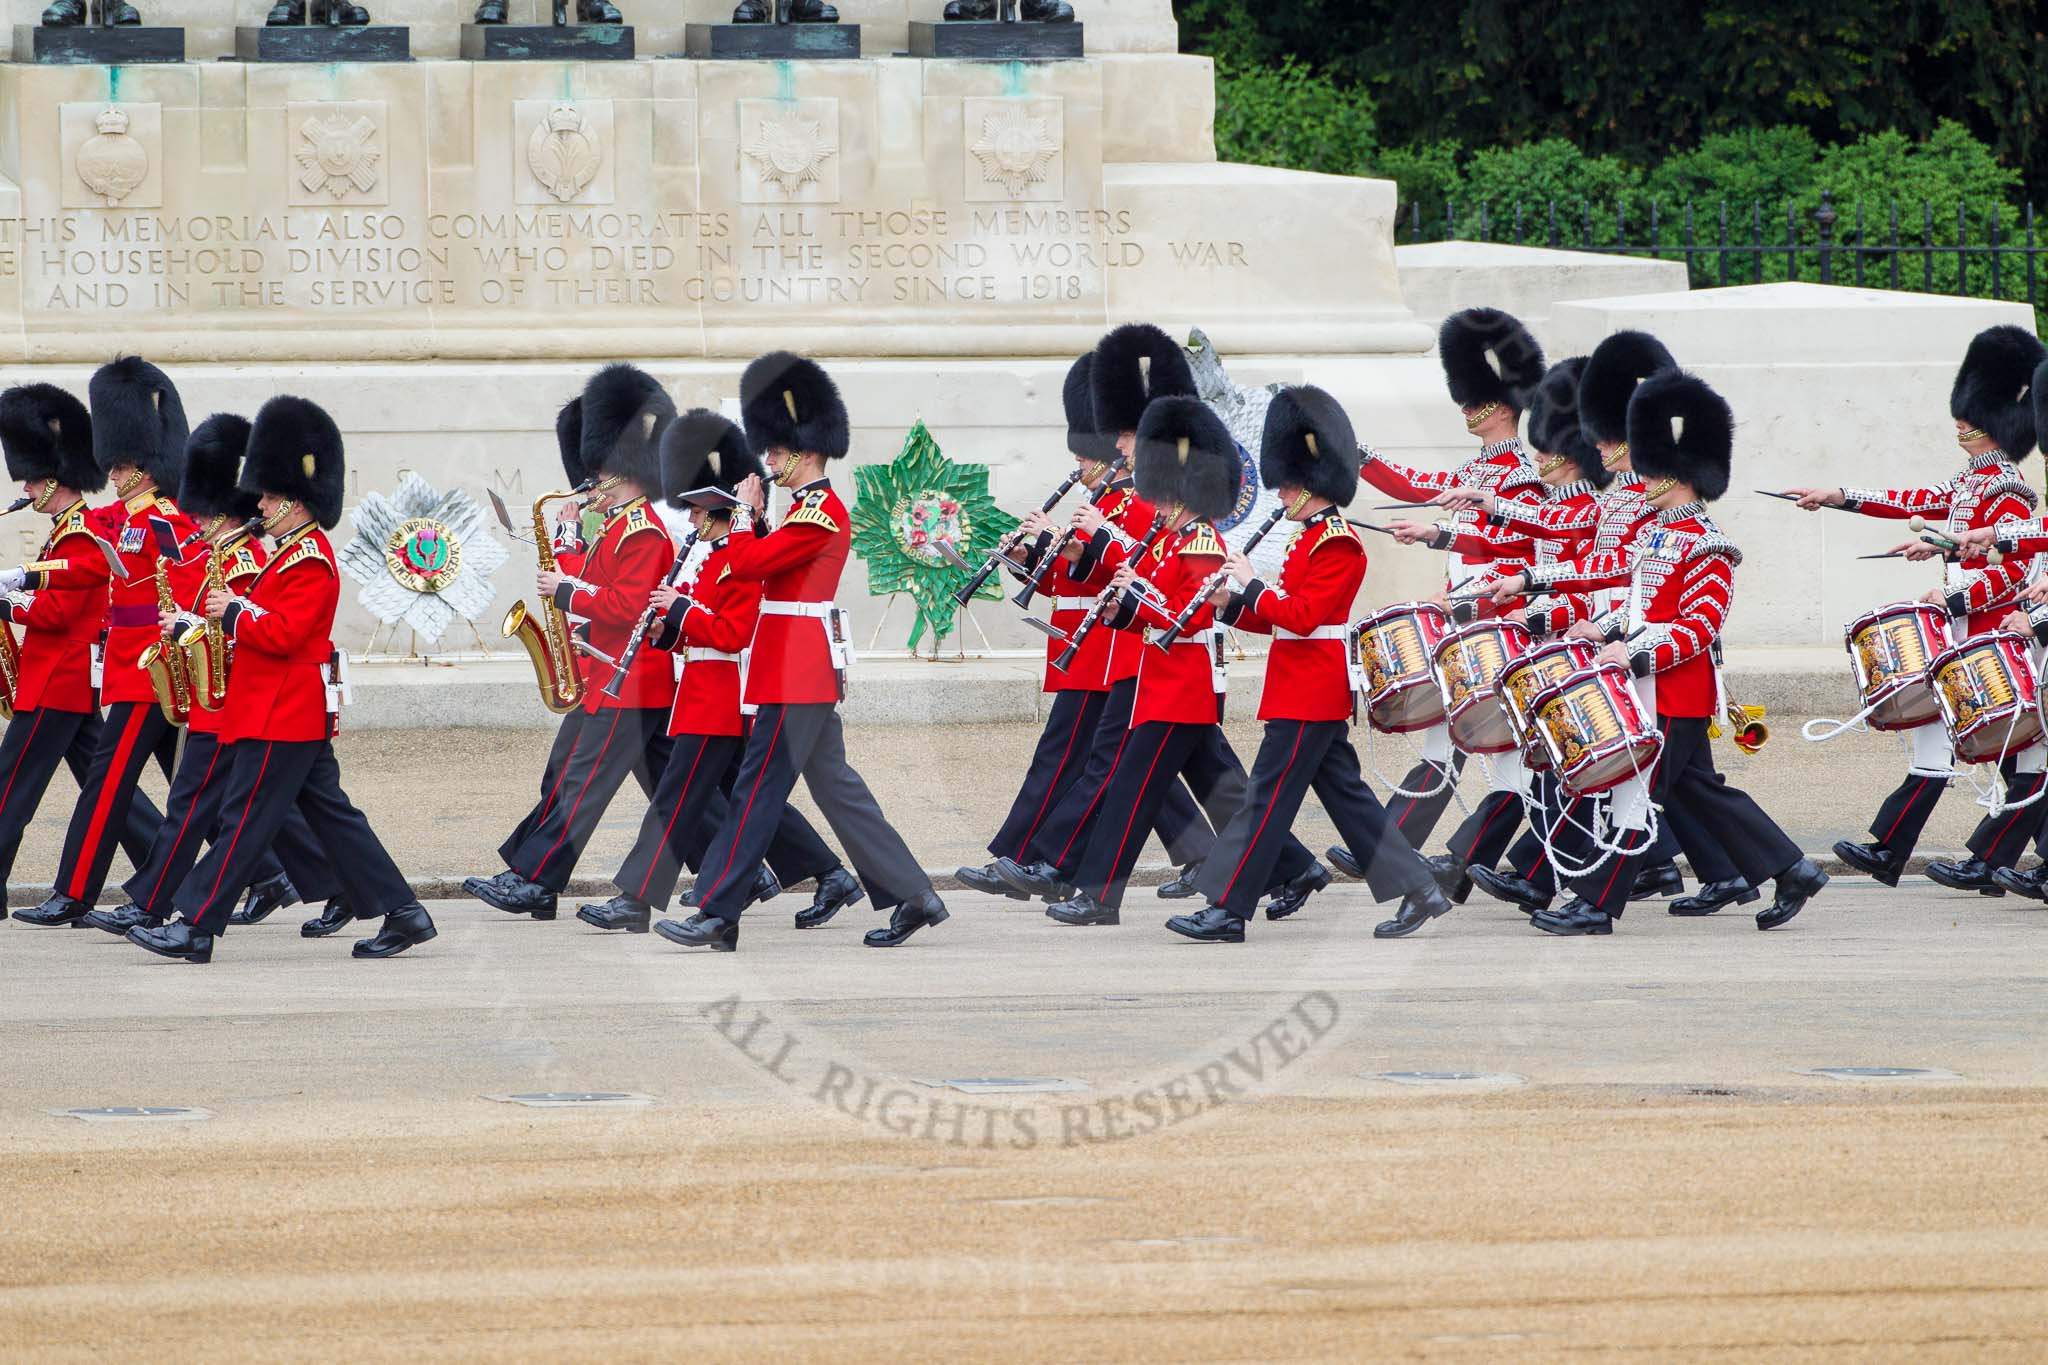 Major General's Review 2013: Musicians of the Band of the Grenadier Guards and Drummers of the Band of the Grenadier Guards..
Horse Guards Parade, Westminster,
London SW1,

United Kingdom,
on 01 June 2013 at 10:27, image #94